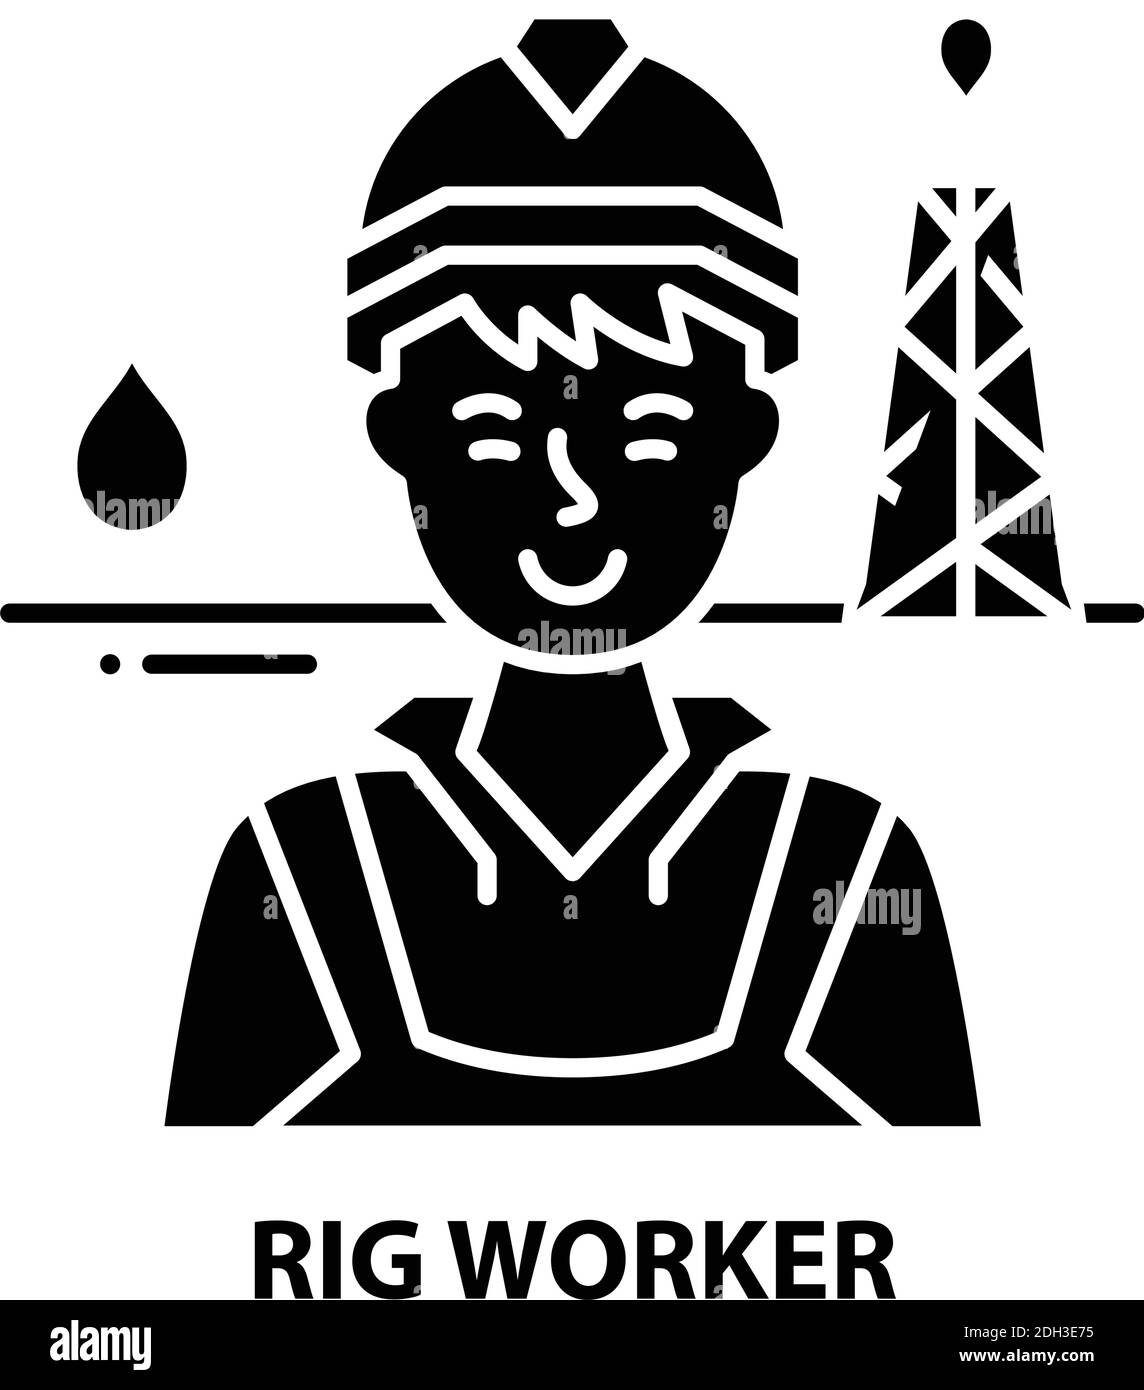 rig worker icon, black vector sign with editable strokes, concept illustration Stock Vector